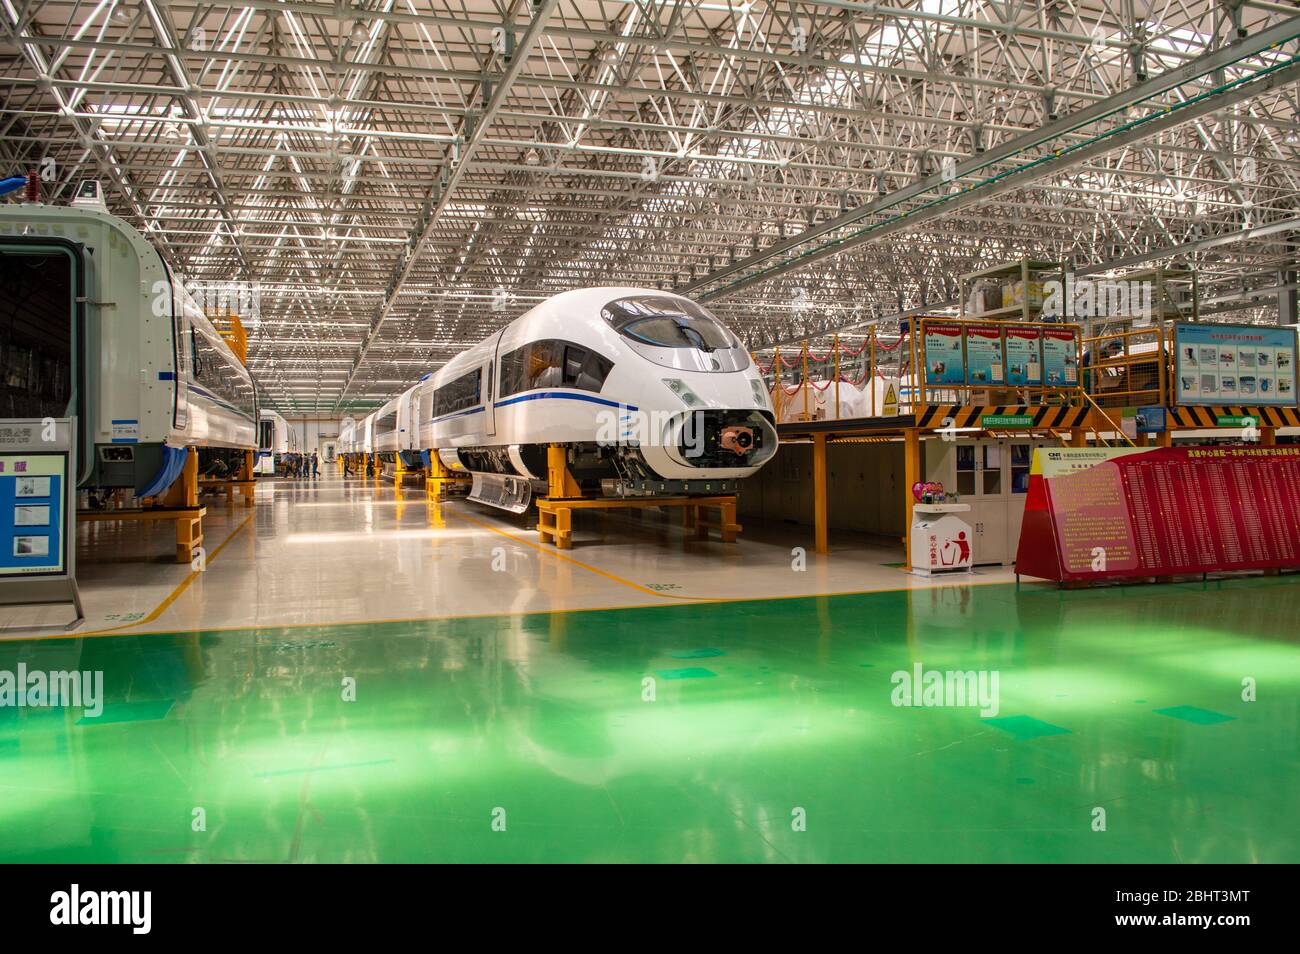 Changchun, Jilin province / China - July 11, 2015: Production hall of CRRC Changchun Railway Vehicles Co. Ltd, leading Chinese manufacturer of high-sp Stock Photo